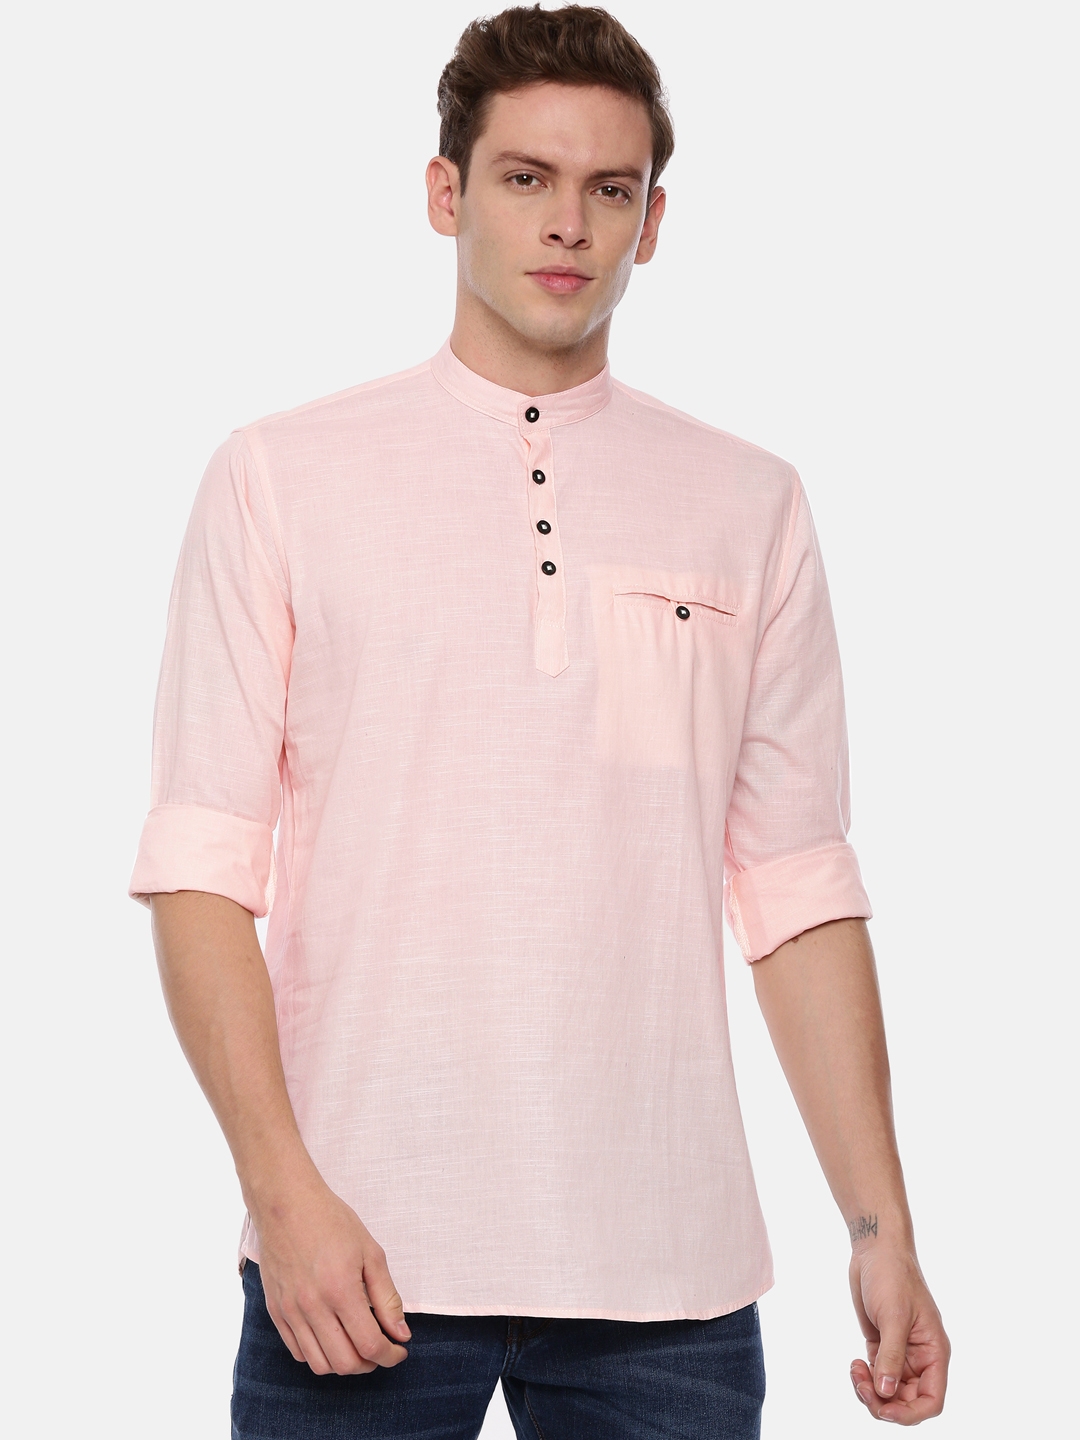 ROLLER FASHIONS | Roller Fashions Men's Cotton Solid Straight Pink Color Short Kurta